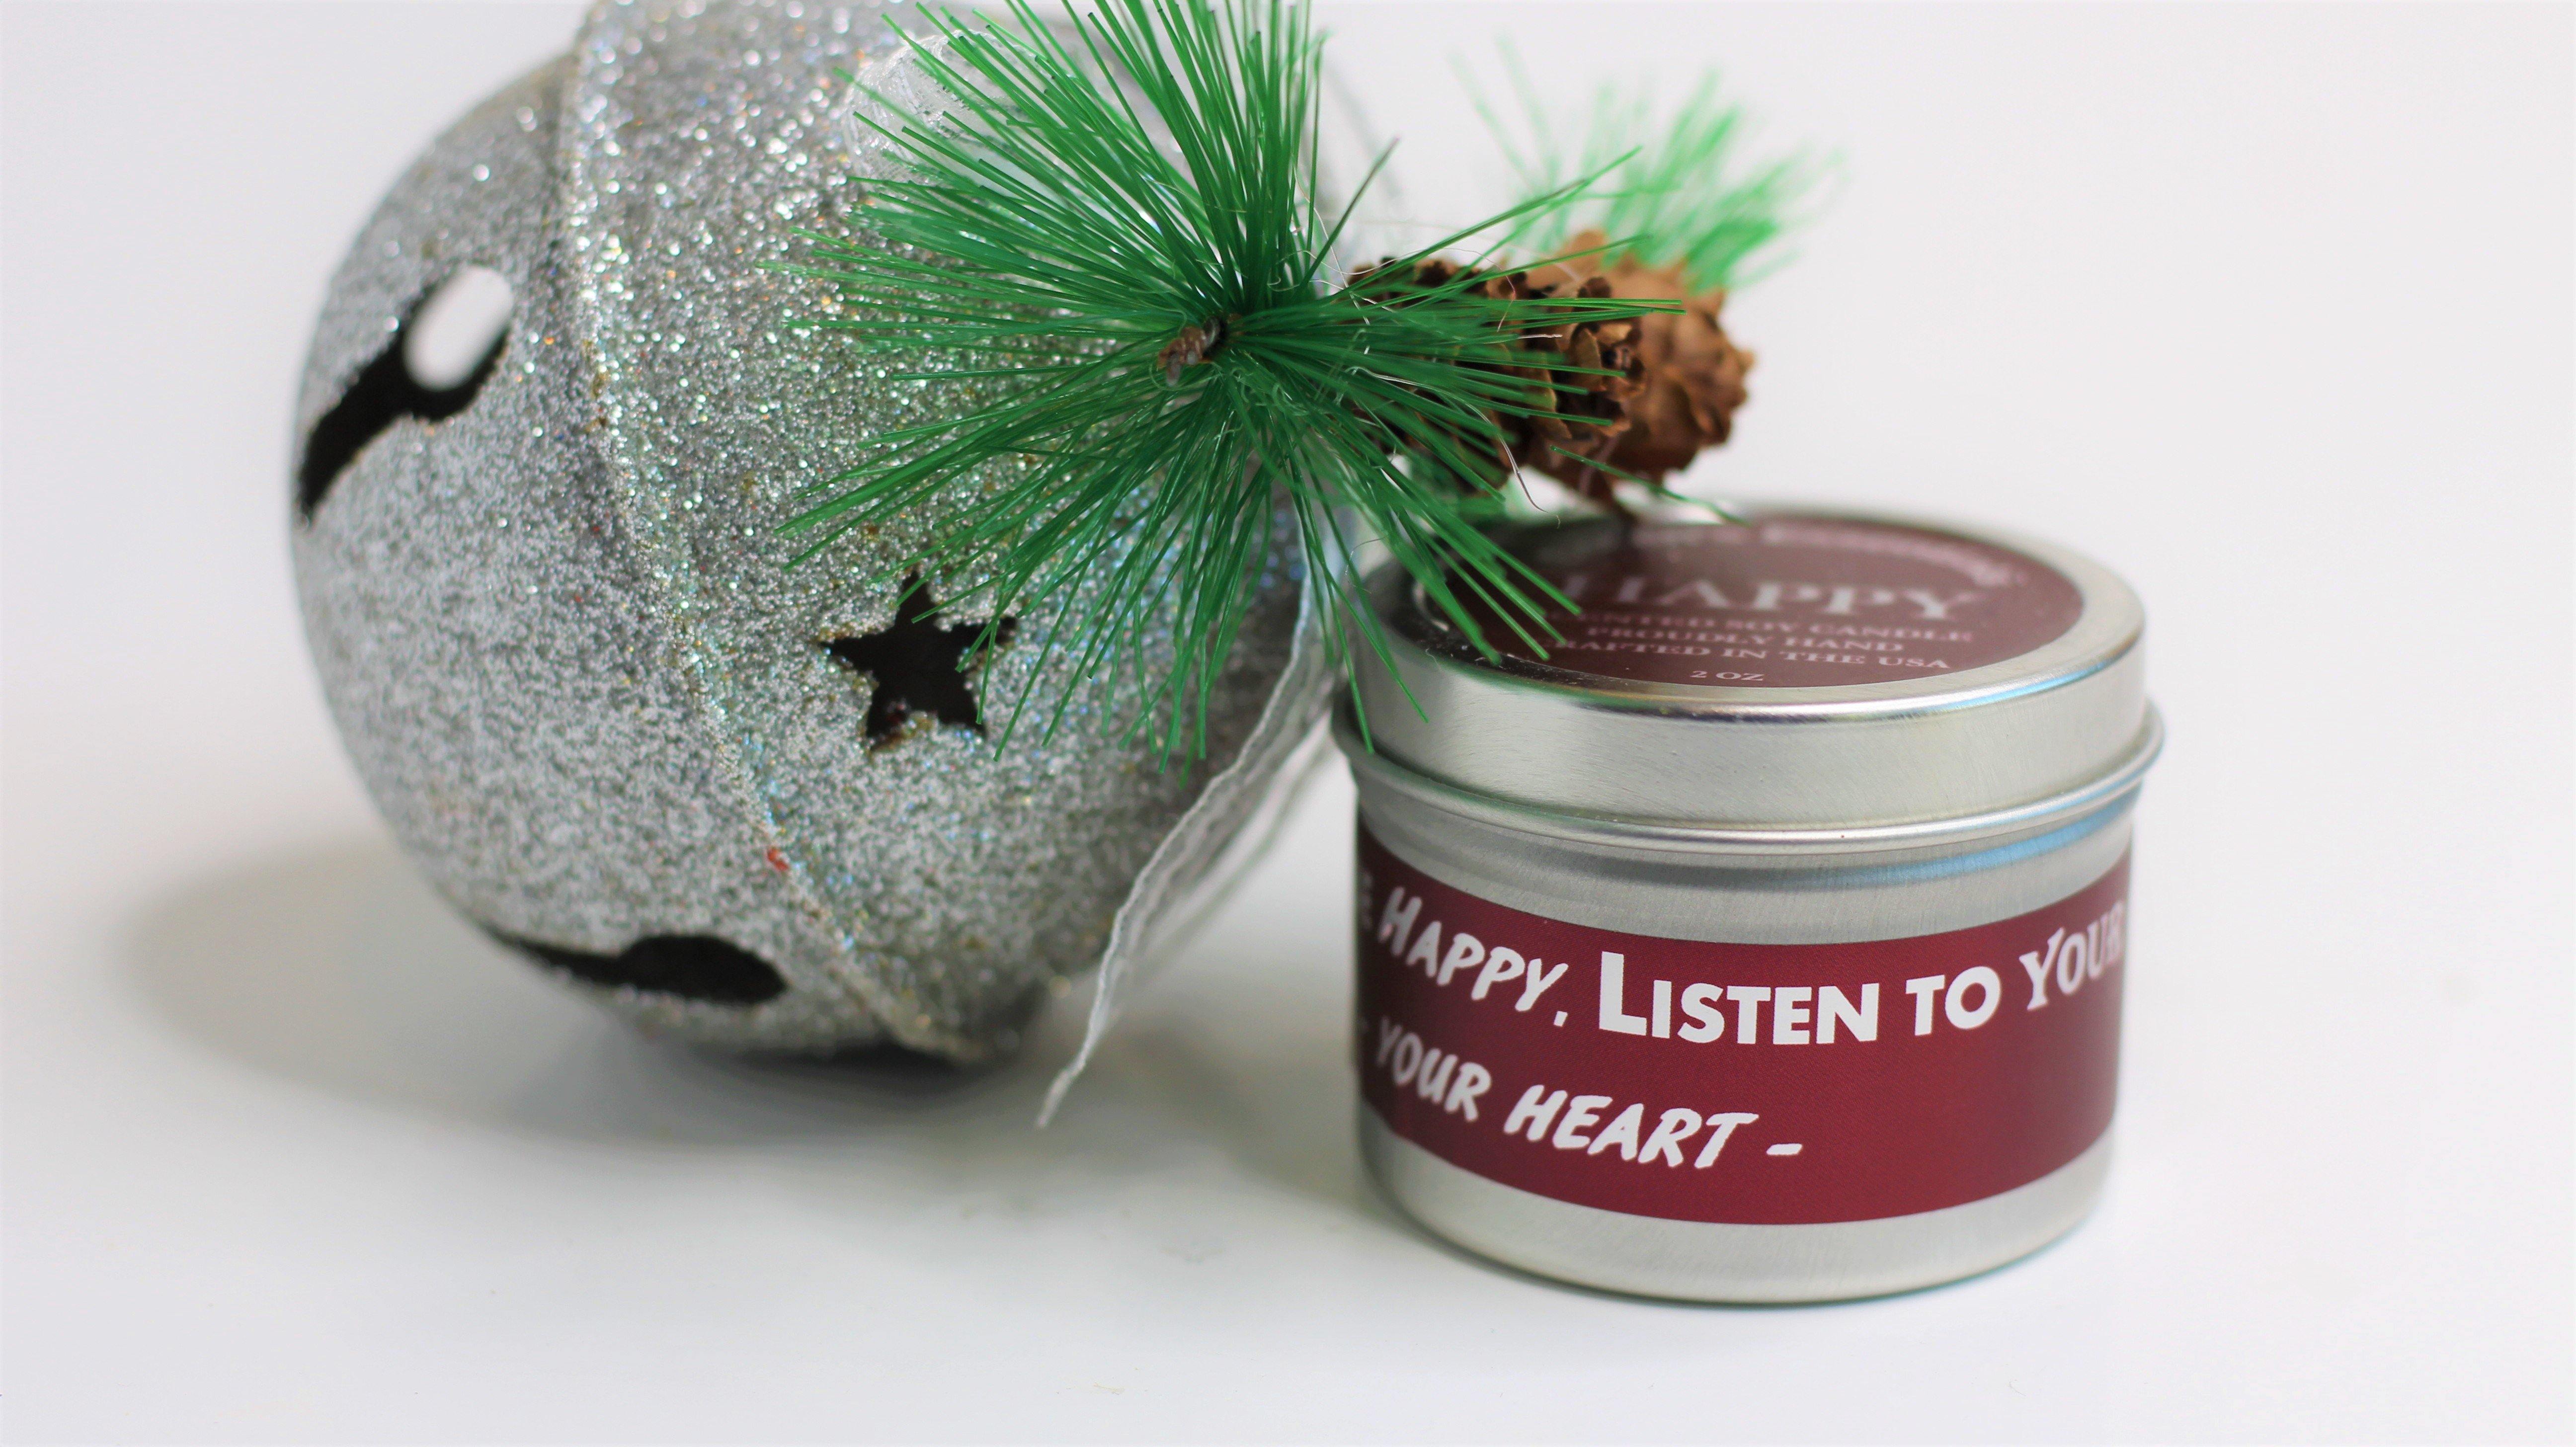 Inspirational Travel Candle; HAPPY - Eileen's Essentials